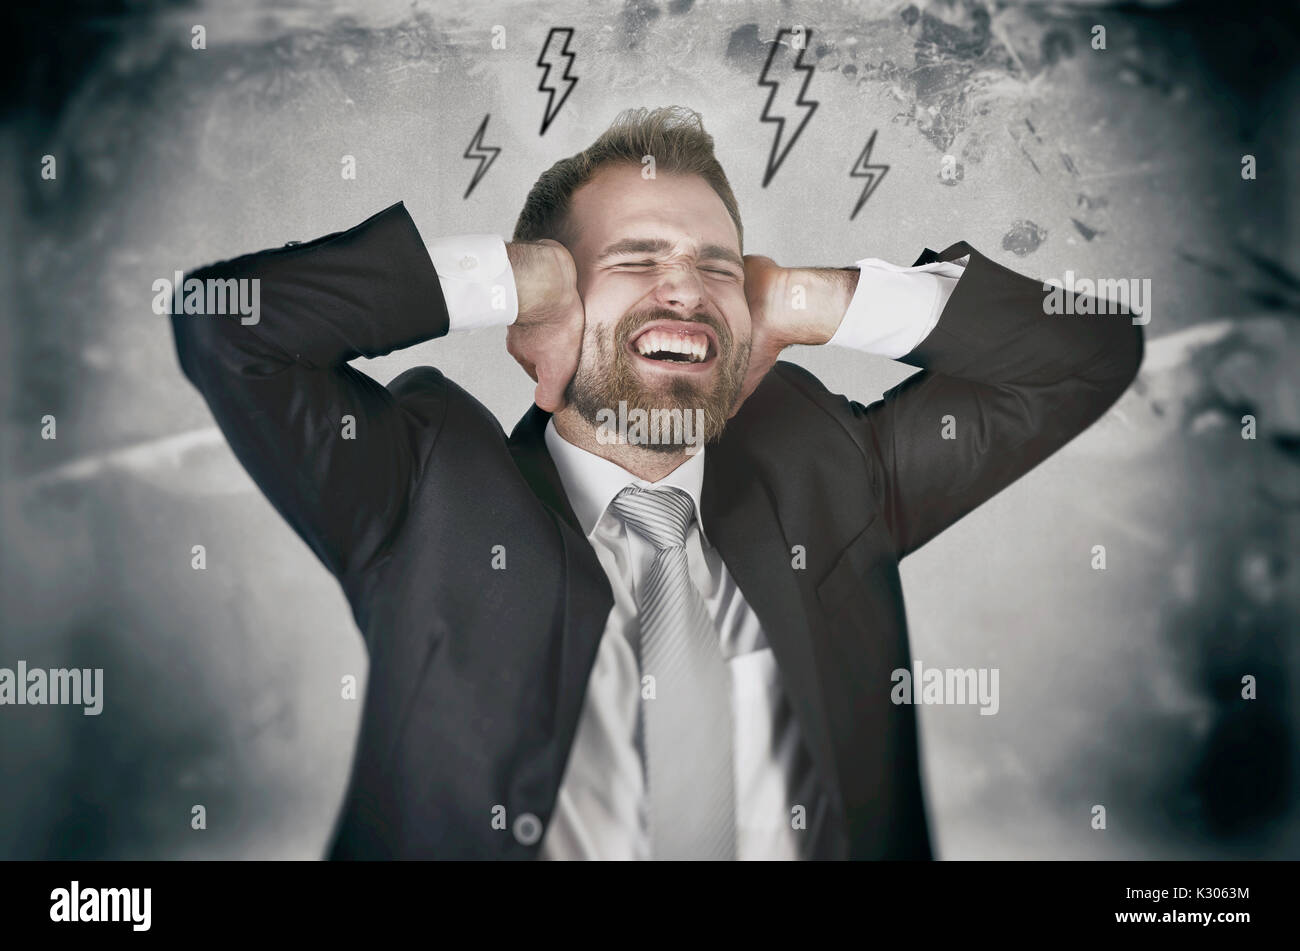 Employee hate his work and, screaming and covering his ears. angry businessman stress work job furious business overload concept Stock Photo